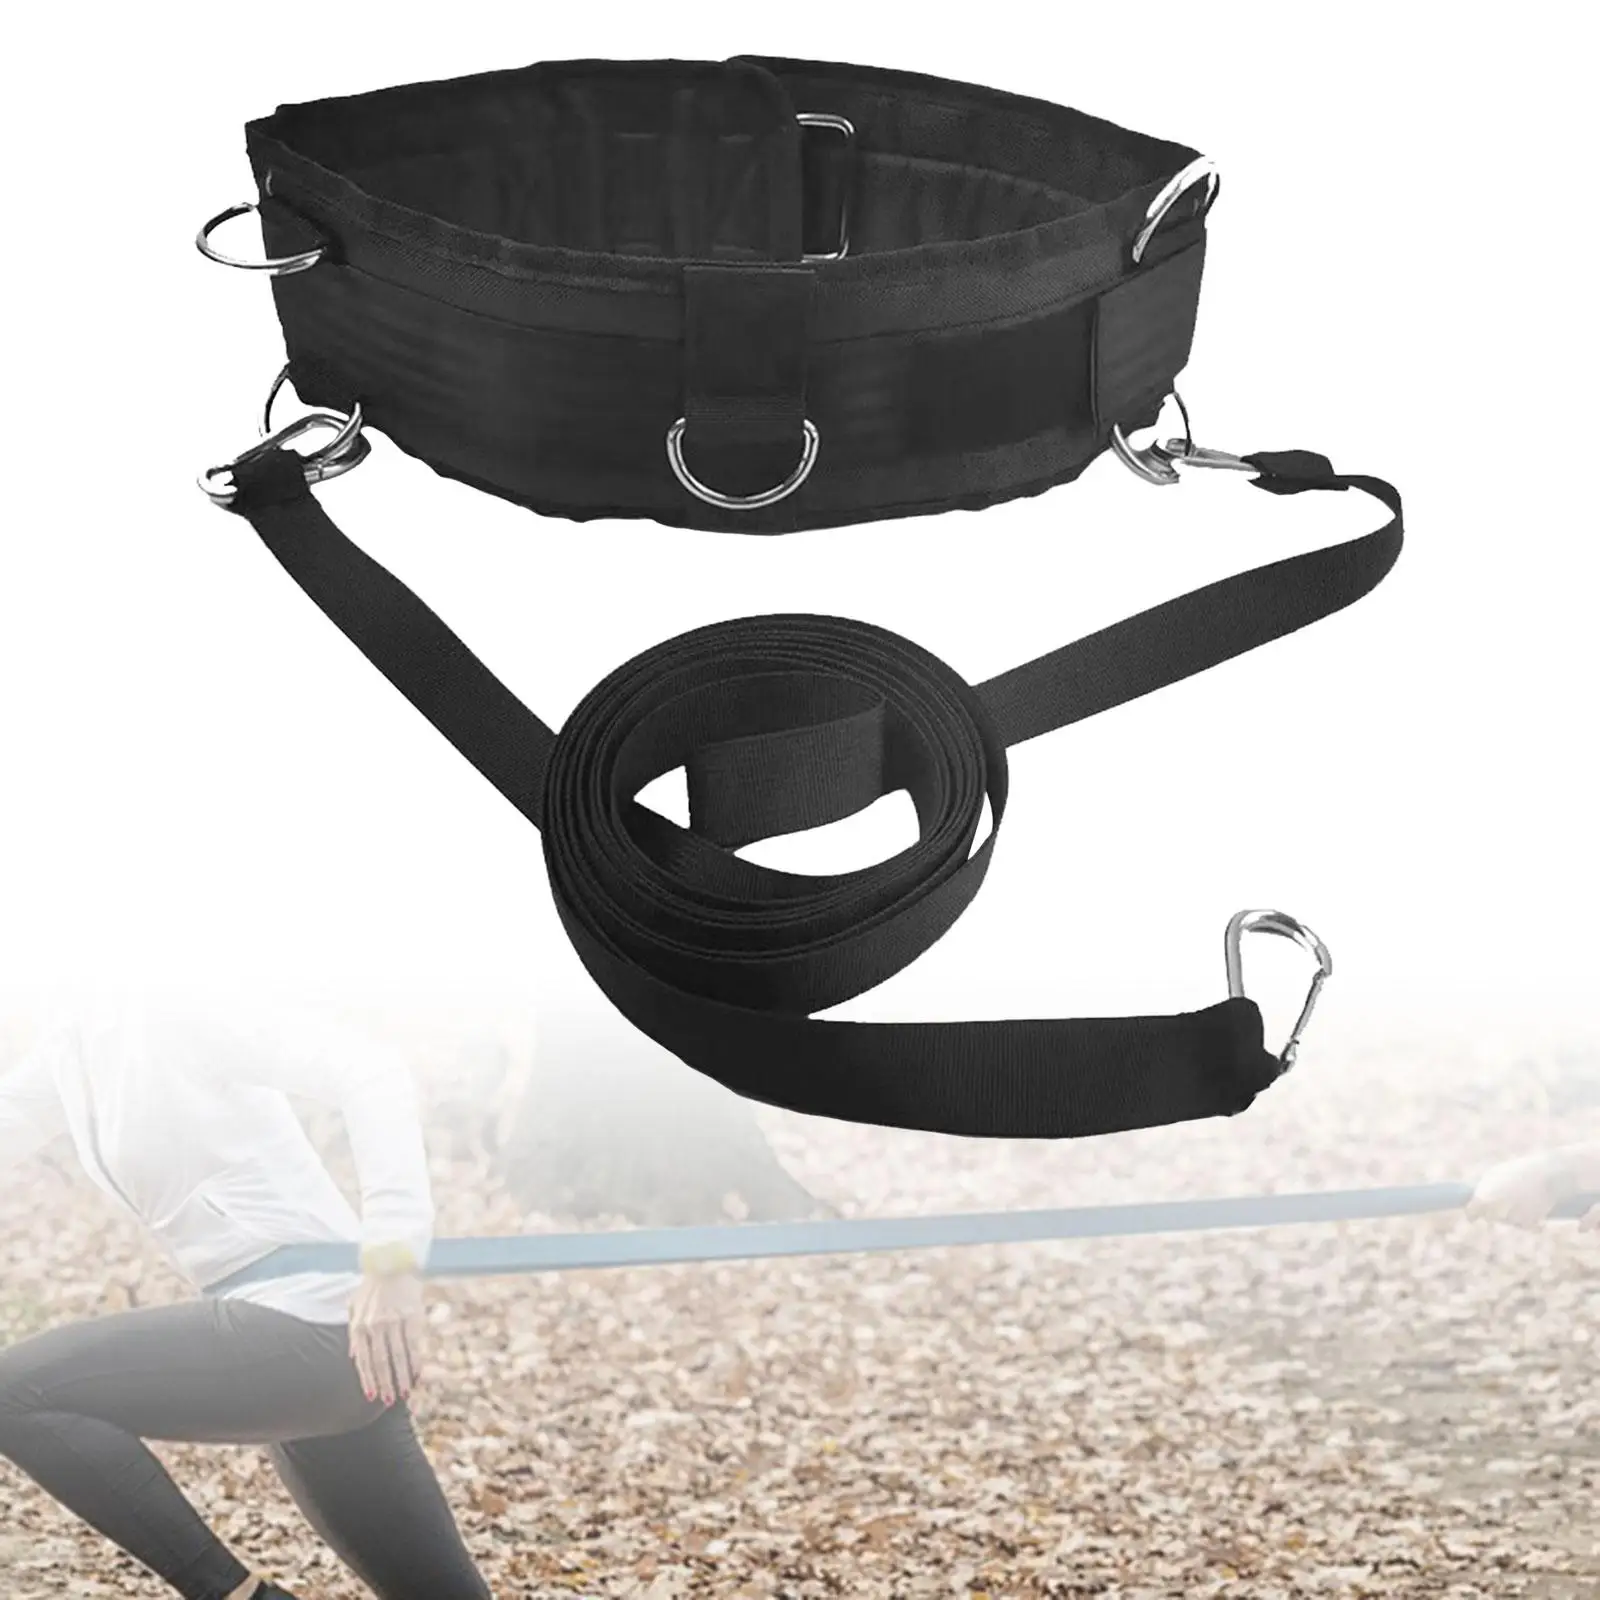 Waist Belt for Pulling Sled Trainer Rope Exercise Body Stretching Resistance Band for Baseball Strength Speed Agility Training